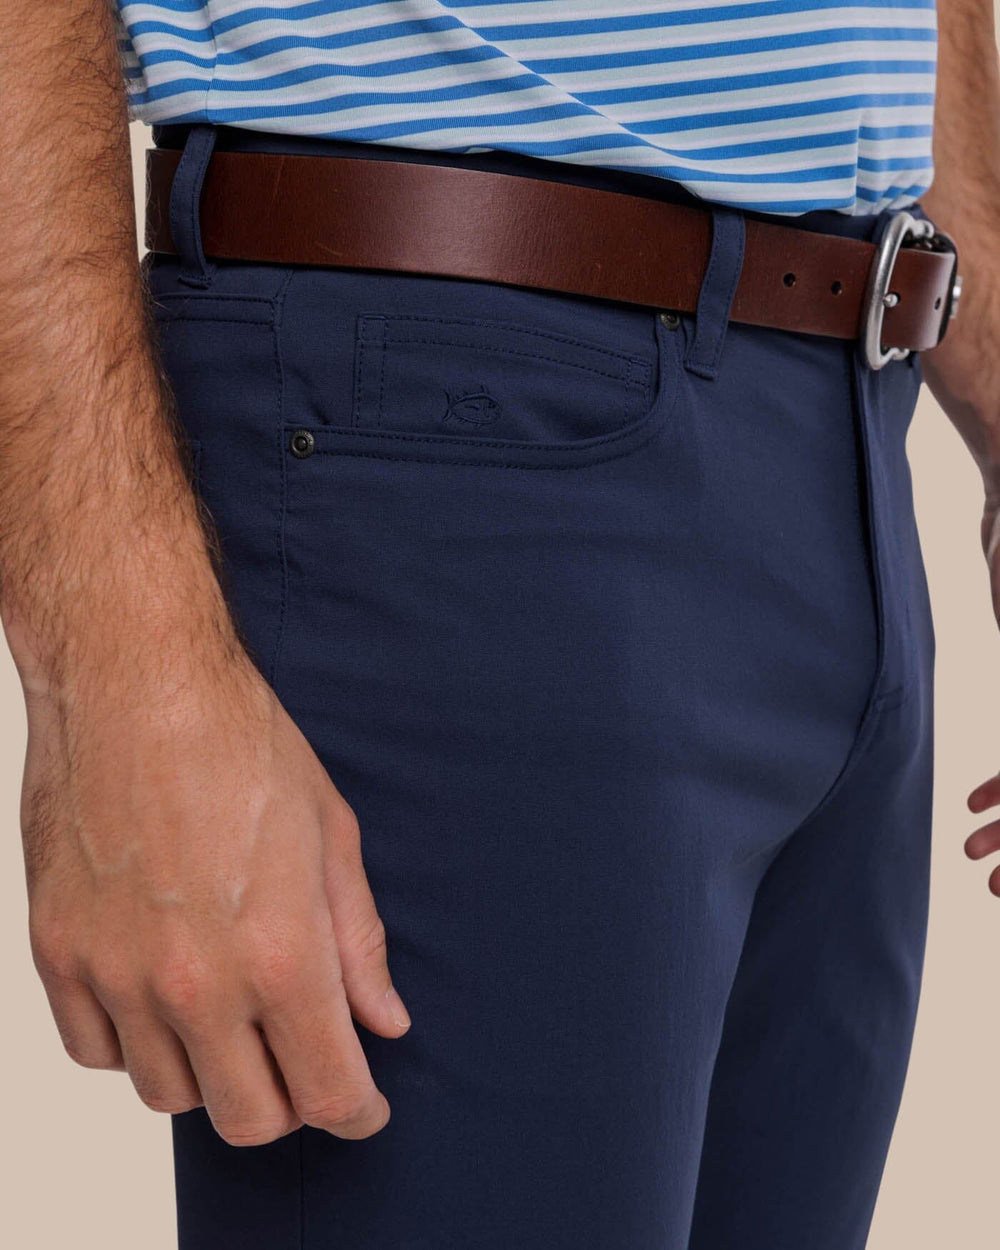 The detail view of the Southern Tide Intercoastal Performance Pant by Southern Tide - True Navy